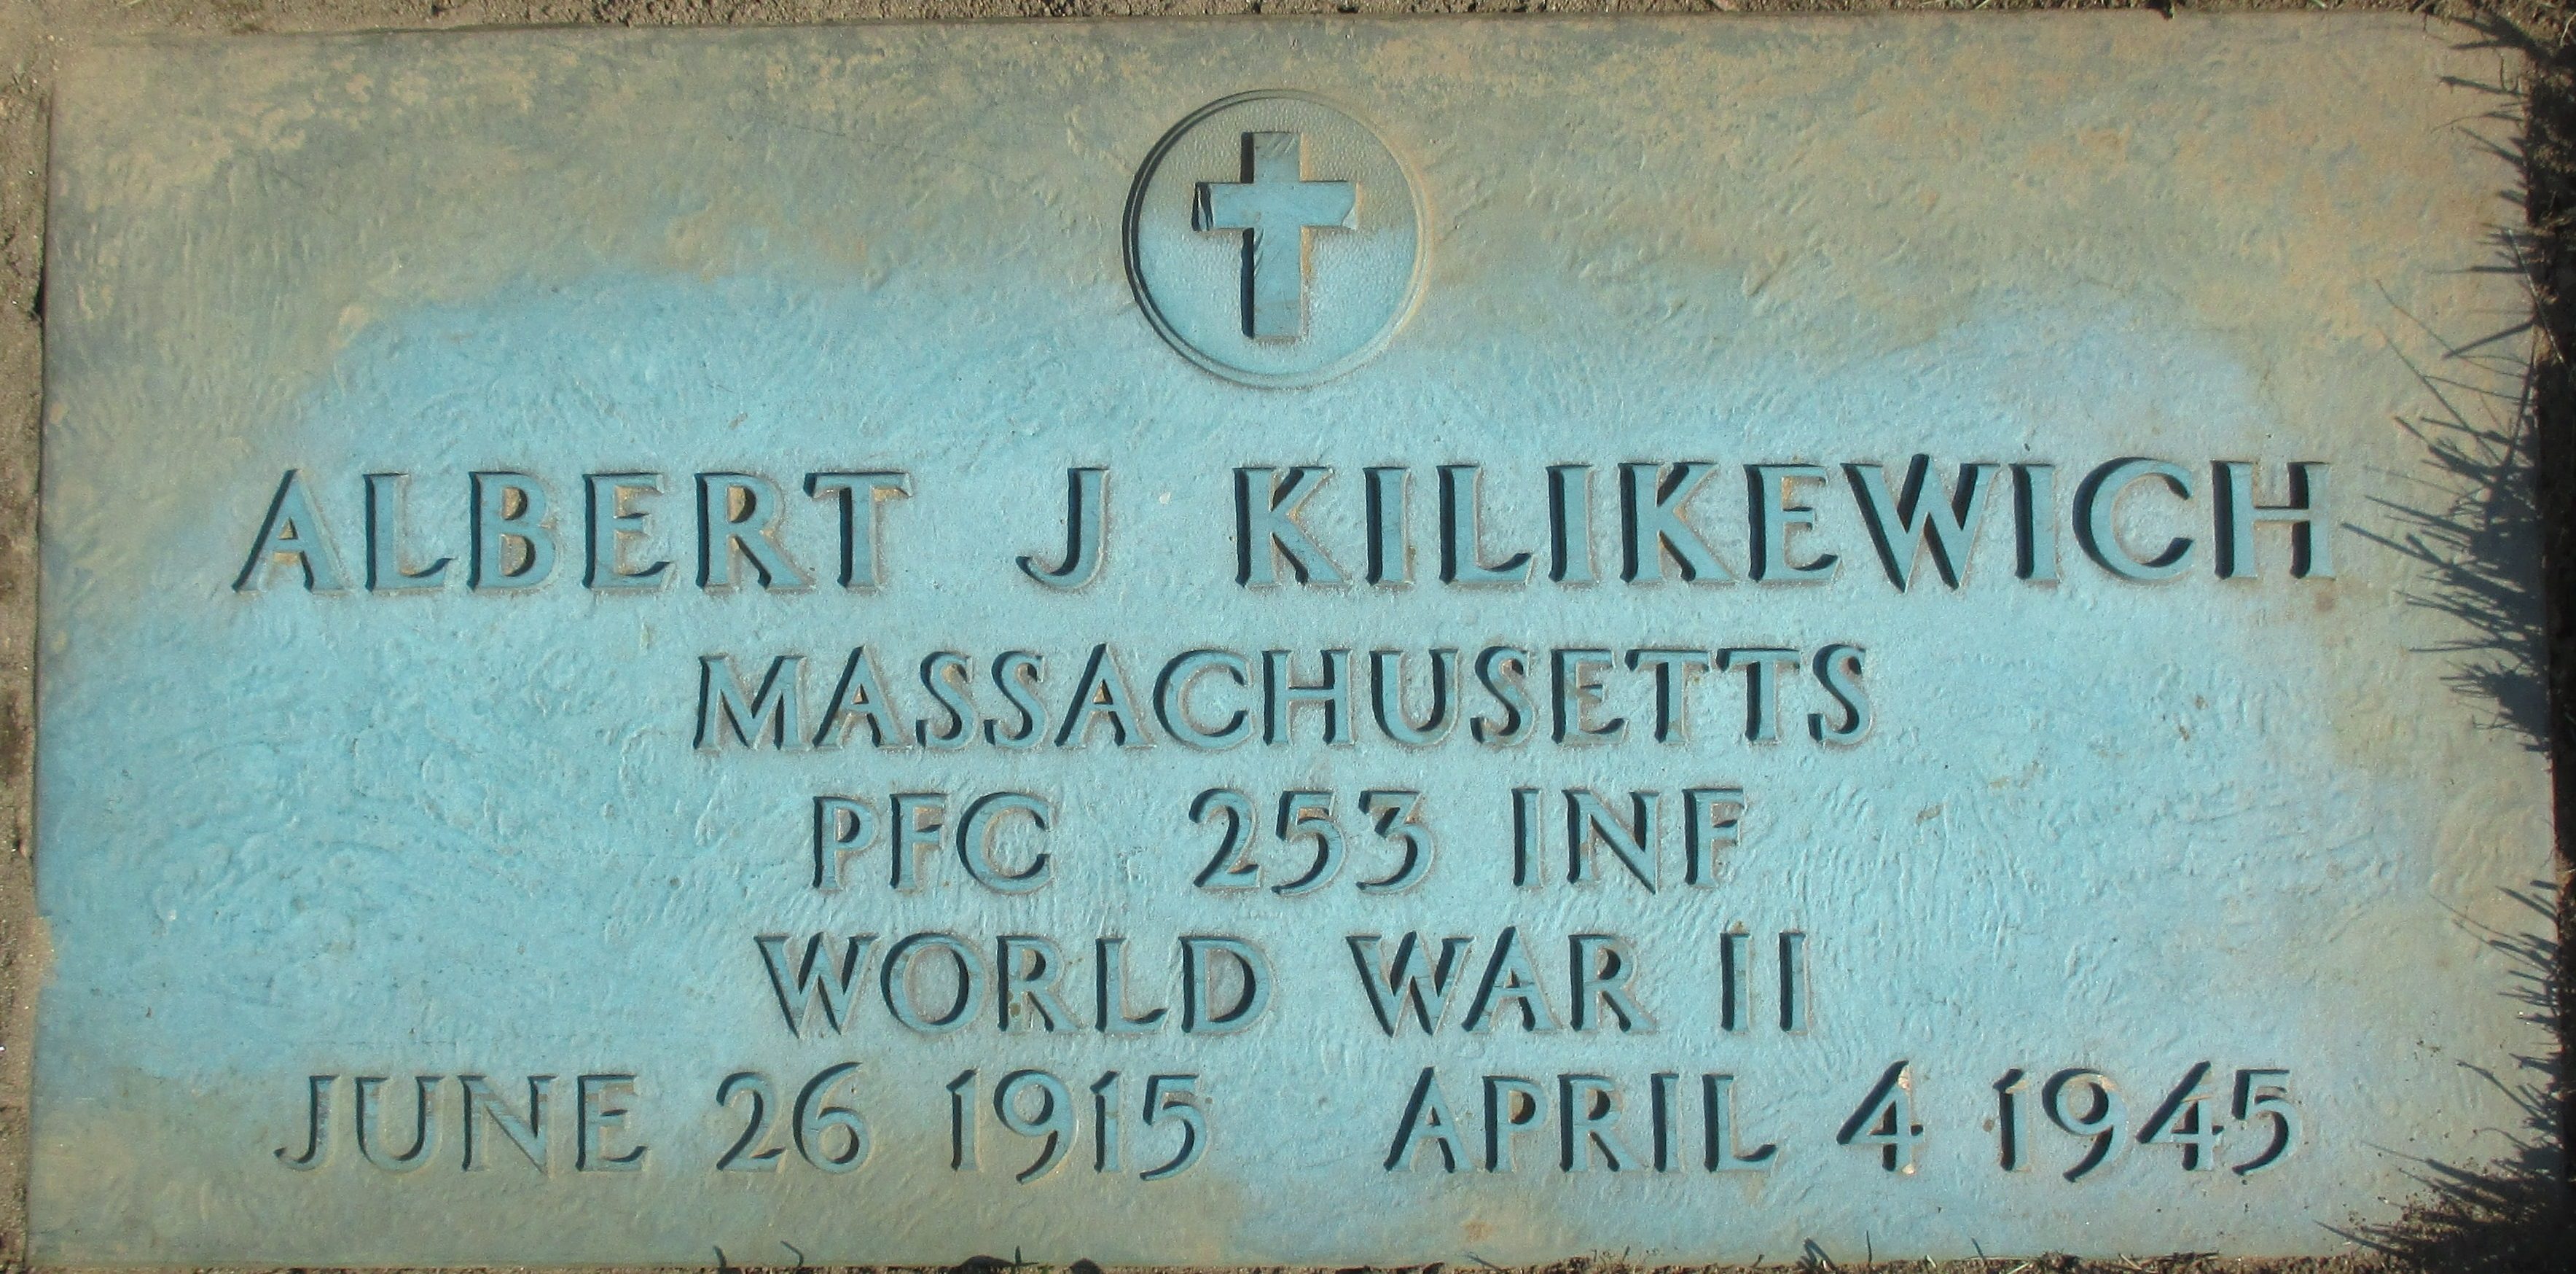 PFC Albert Joseph Kilikewich 31460335 US Army KIA. He was born on June 26, 1915, in Northampton, Massachusetts,the son of William Killikewich, and Barbara Killikewich. He was the husband of Gladys C Bourget Kilikewich. He entered the US Army on March 31, 1944, at the age of 28.  He served in First Platoon, Company F, 253rd Infantry Regiment, 63rd Infantry Division.On April 4, 1945, after First Platoon had crossed the Jagst River, in to the town of Untergriesheim, they were clearing out the houses to guarantee that the town was safe for them to stay in since they were the reserve company. PFC Robert M. Bane and PFC Albert J. Kilikewich were in the backyard of one of the houses in the town of Untergriesheim. The two men were relaxing after completing their second river crossing in the past three days. The men were laying about 15 feet away from each other, talking and opening can rations. Robert Bane was extremely excited about the can of cheese and bacon that he had been saving to eat for about a month. At this point, an artillery piece exploded and sent large pieces of shrapnel at the men, and the explosion sent the can of cheese and bacon flying from Bane’s hand. PFC Bane was shouting and screaming every curse word he knew, and he thought it was odd that Kilikewich was not saying anything. Bane looked over, and Kilikewich had been killed by the shrapnel. Bane then started to check himself for shrapnel, and noticed that he was saved by his rifle stock of his Thompson submachine gun that received a large piece of shrapnel in it. After clearing the town, F Company remained in the cellars of the town all day on 4 April to prevent any more deaths from the artillery. The town of Untergriesheim had artillery dropping on it until around 0800 on 6 April. He died at the age of 29. He was Awarded the Combat Infantry Badge, the Purple Heart Medal, The American Theater of operations, the European Theater of Operations Medal ETO with 2 battle star, and the World War Two Victory Medal.